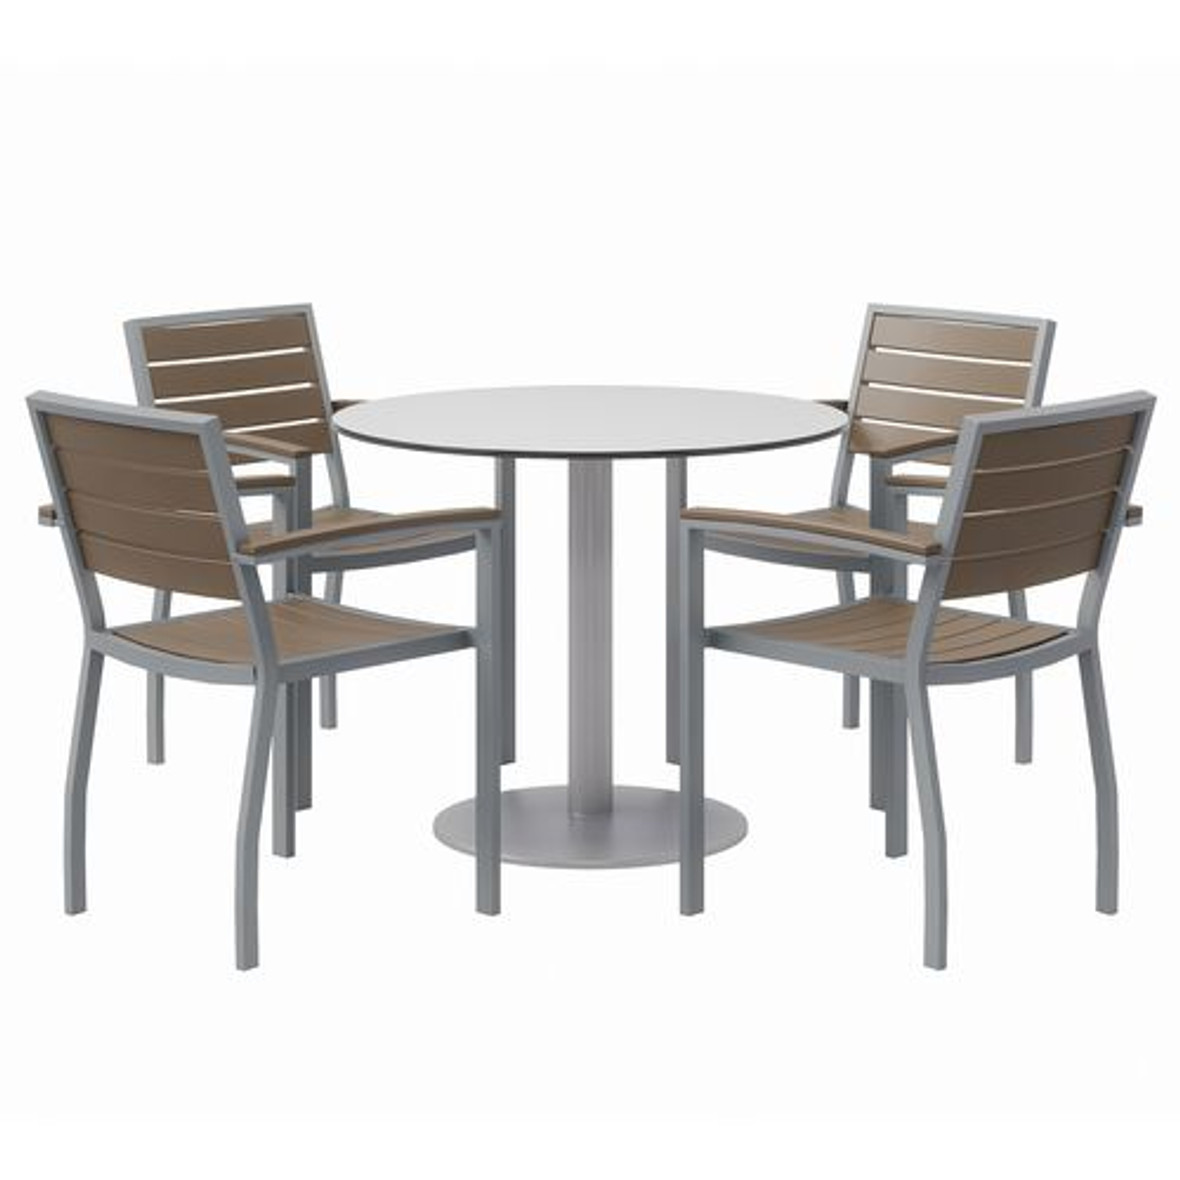 KFI Studios Eveleen Outdoor Patio Table, 4 Mocha Powder-coated Polymer Chairs, Round, 36" Dia X 29h, Fashion Gray, Ships In 4-6 Bus Days